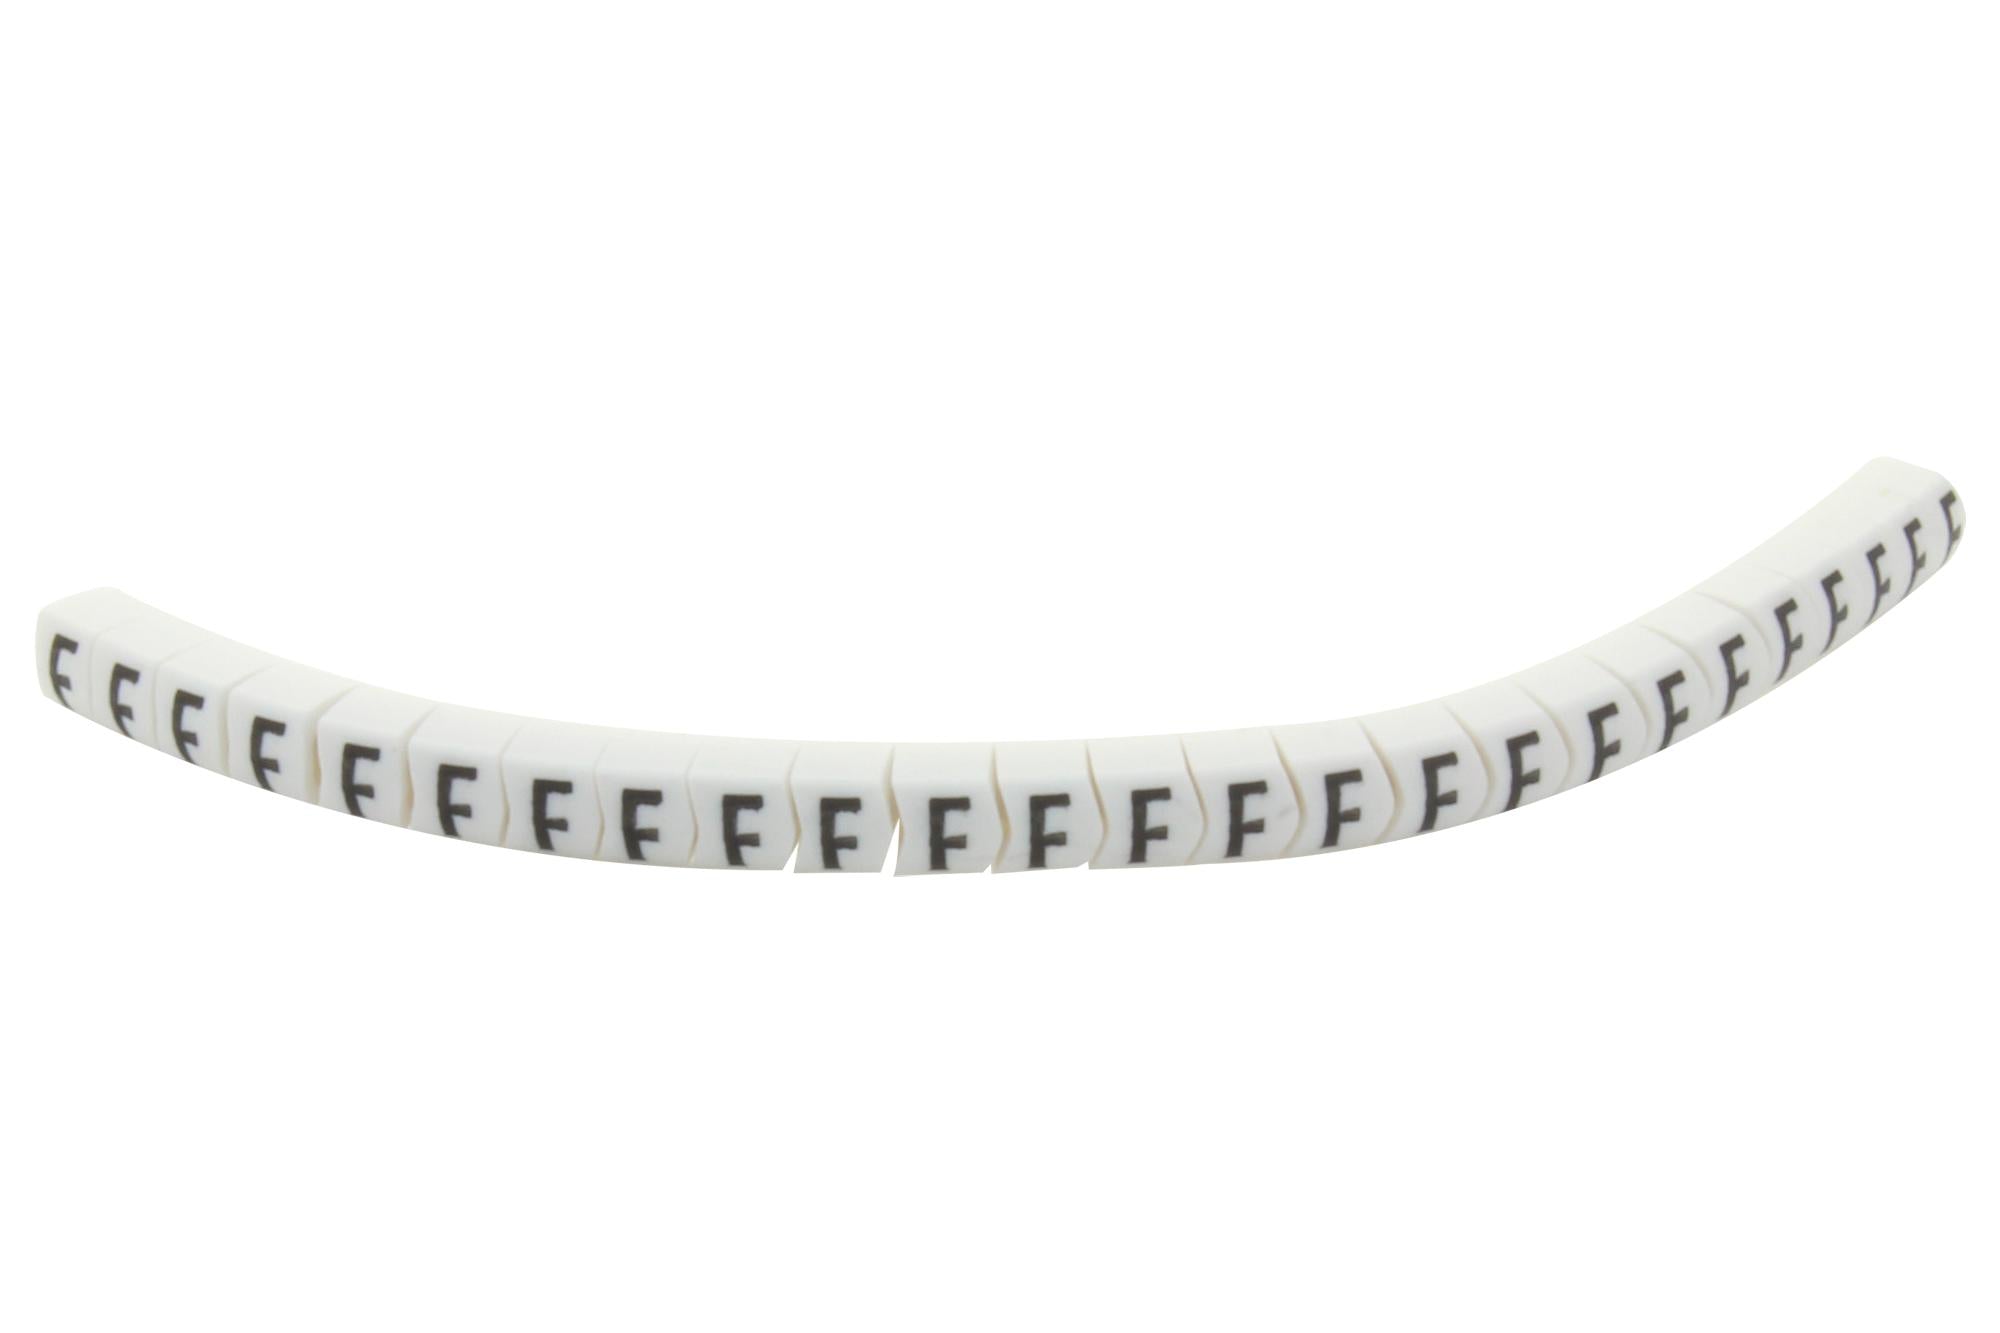 901-11029 CABLE MARKER, PRE PRINTED, PVC, WHITE HELLERMANNTYTON